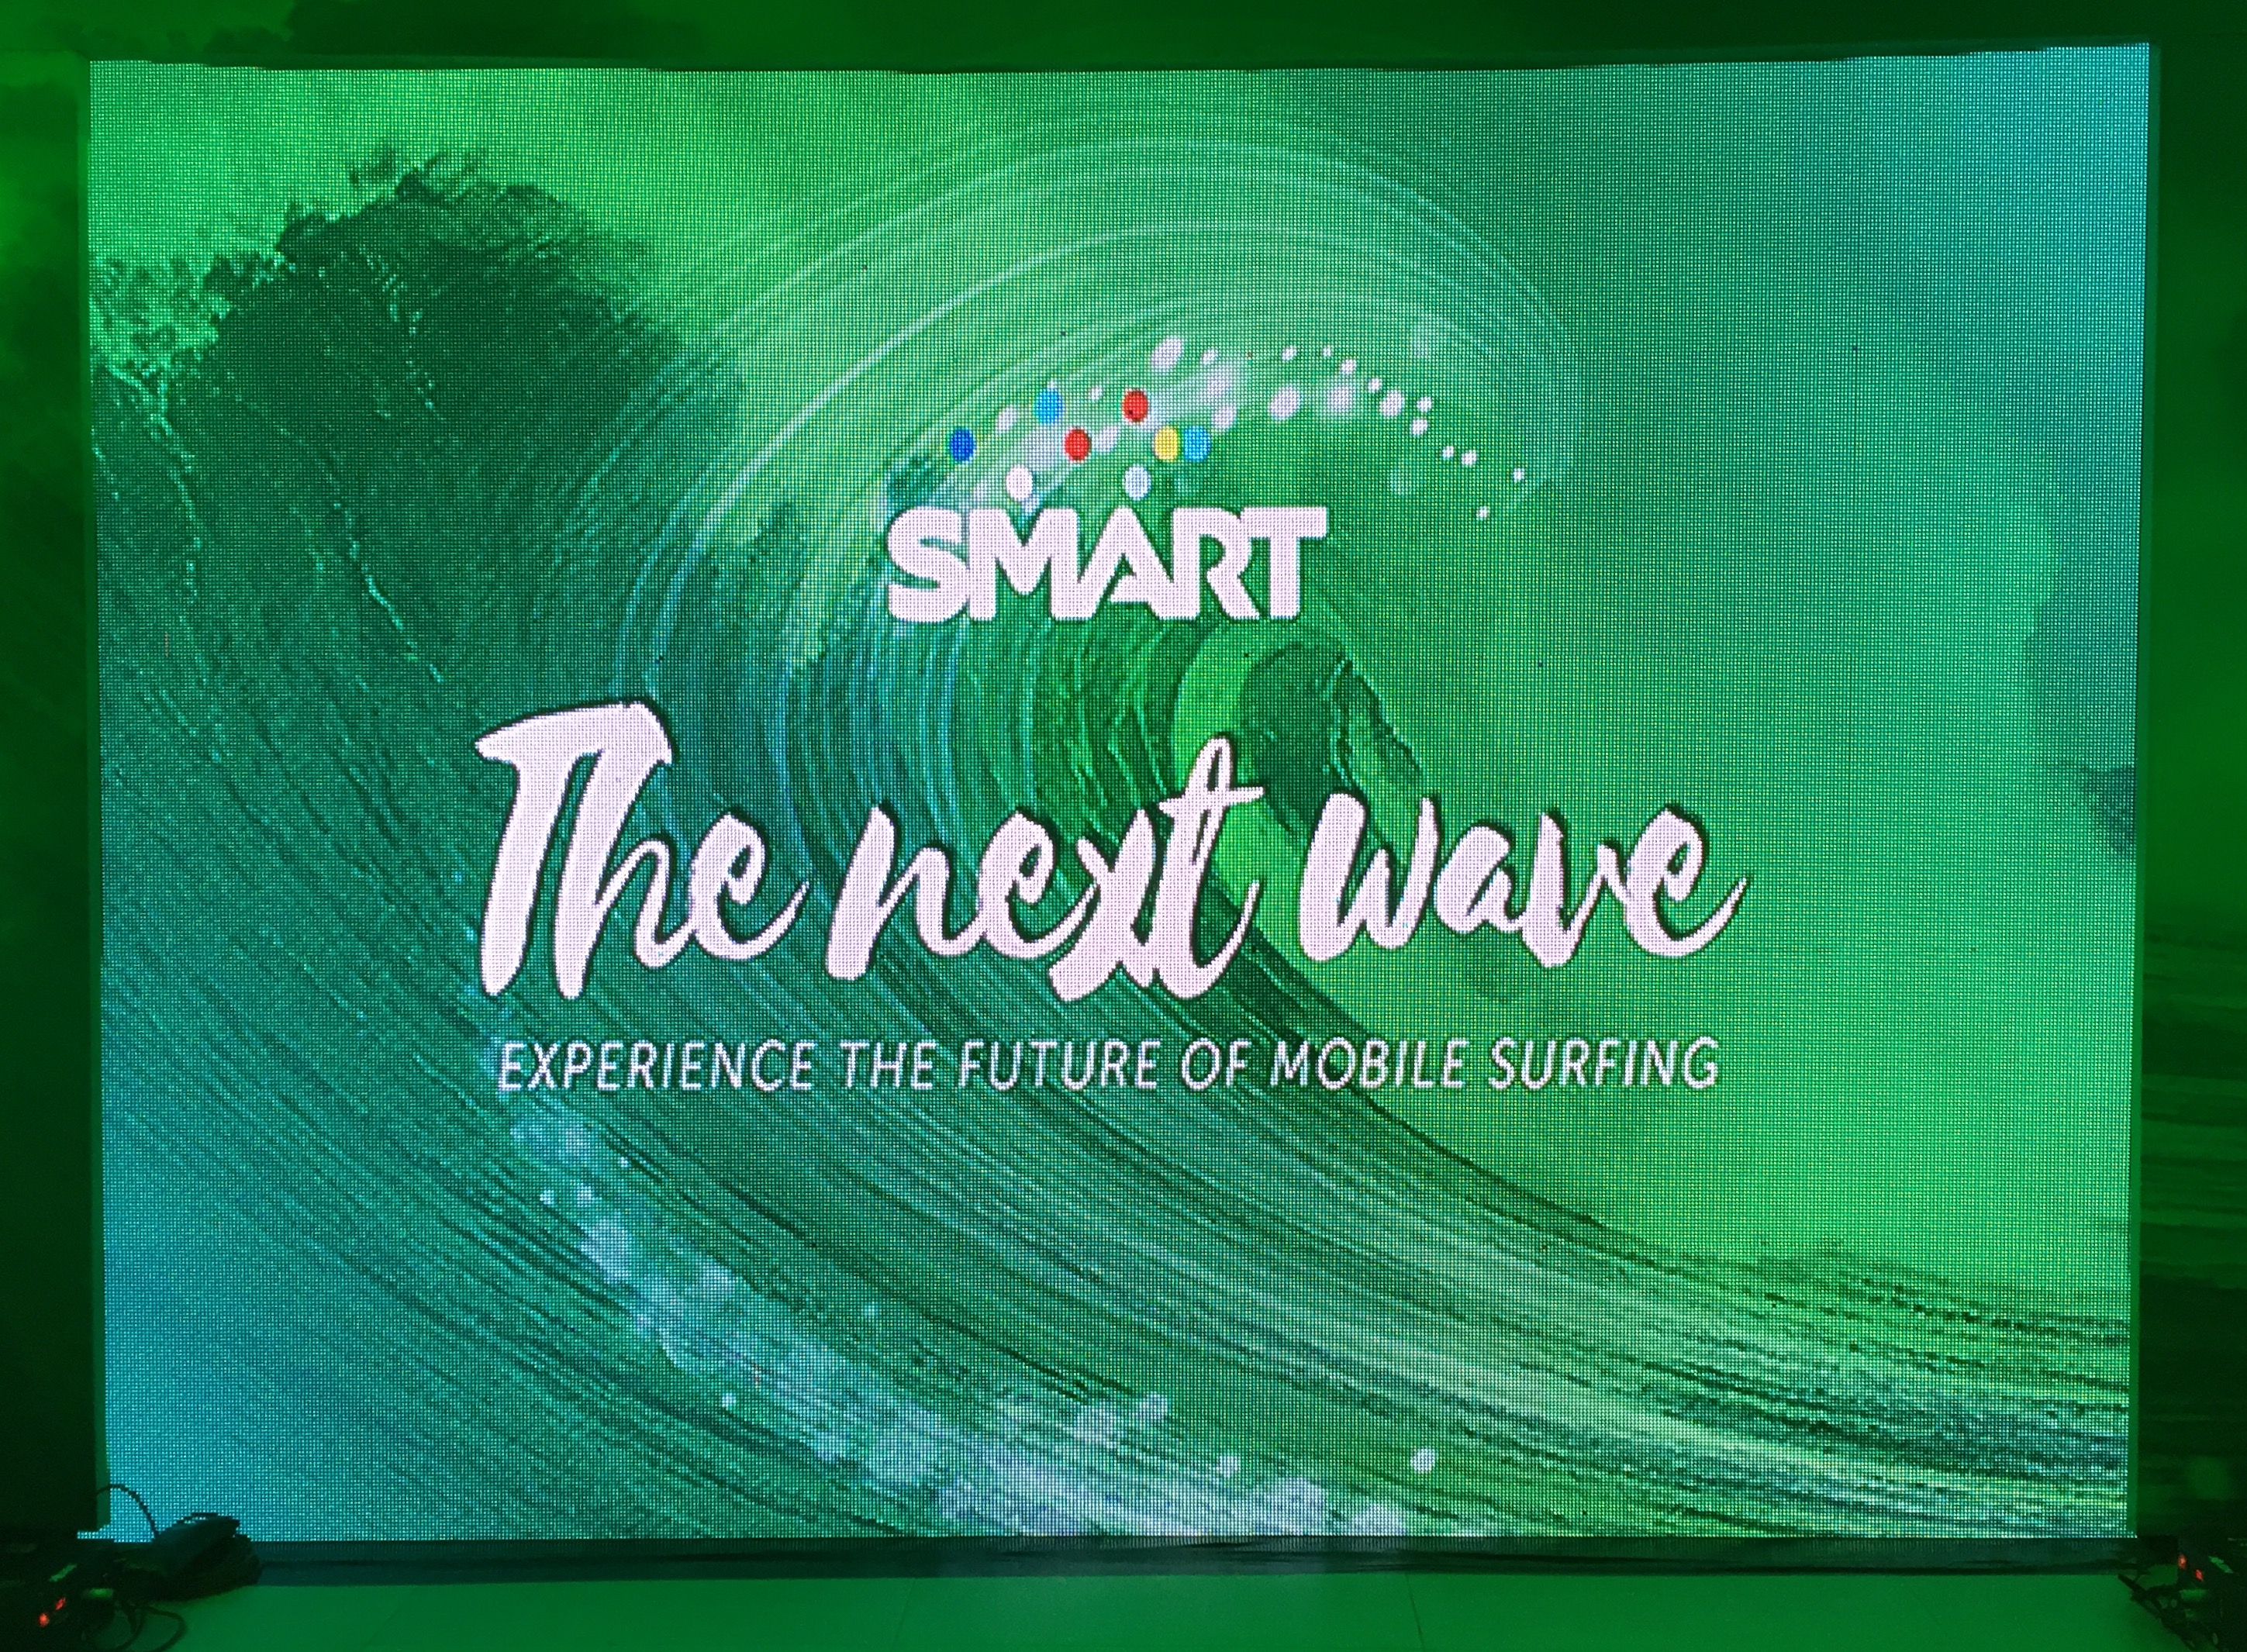 Smart the next wave